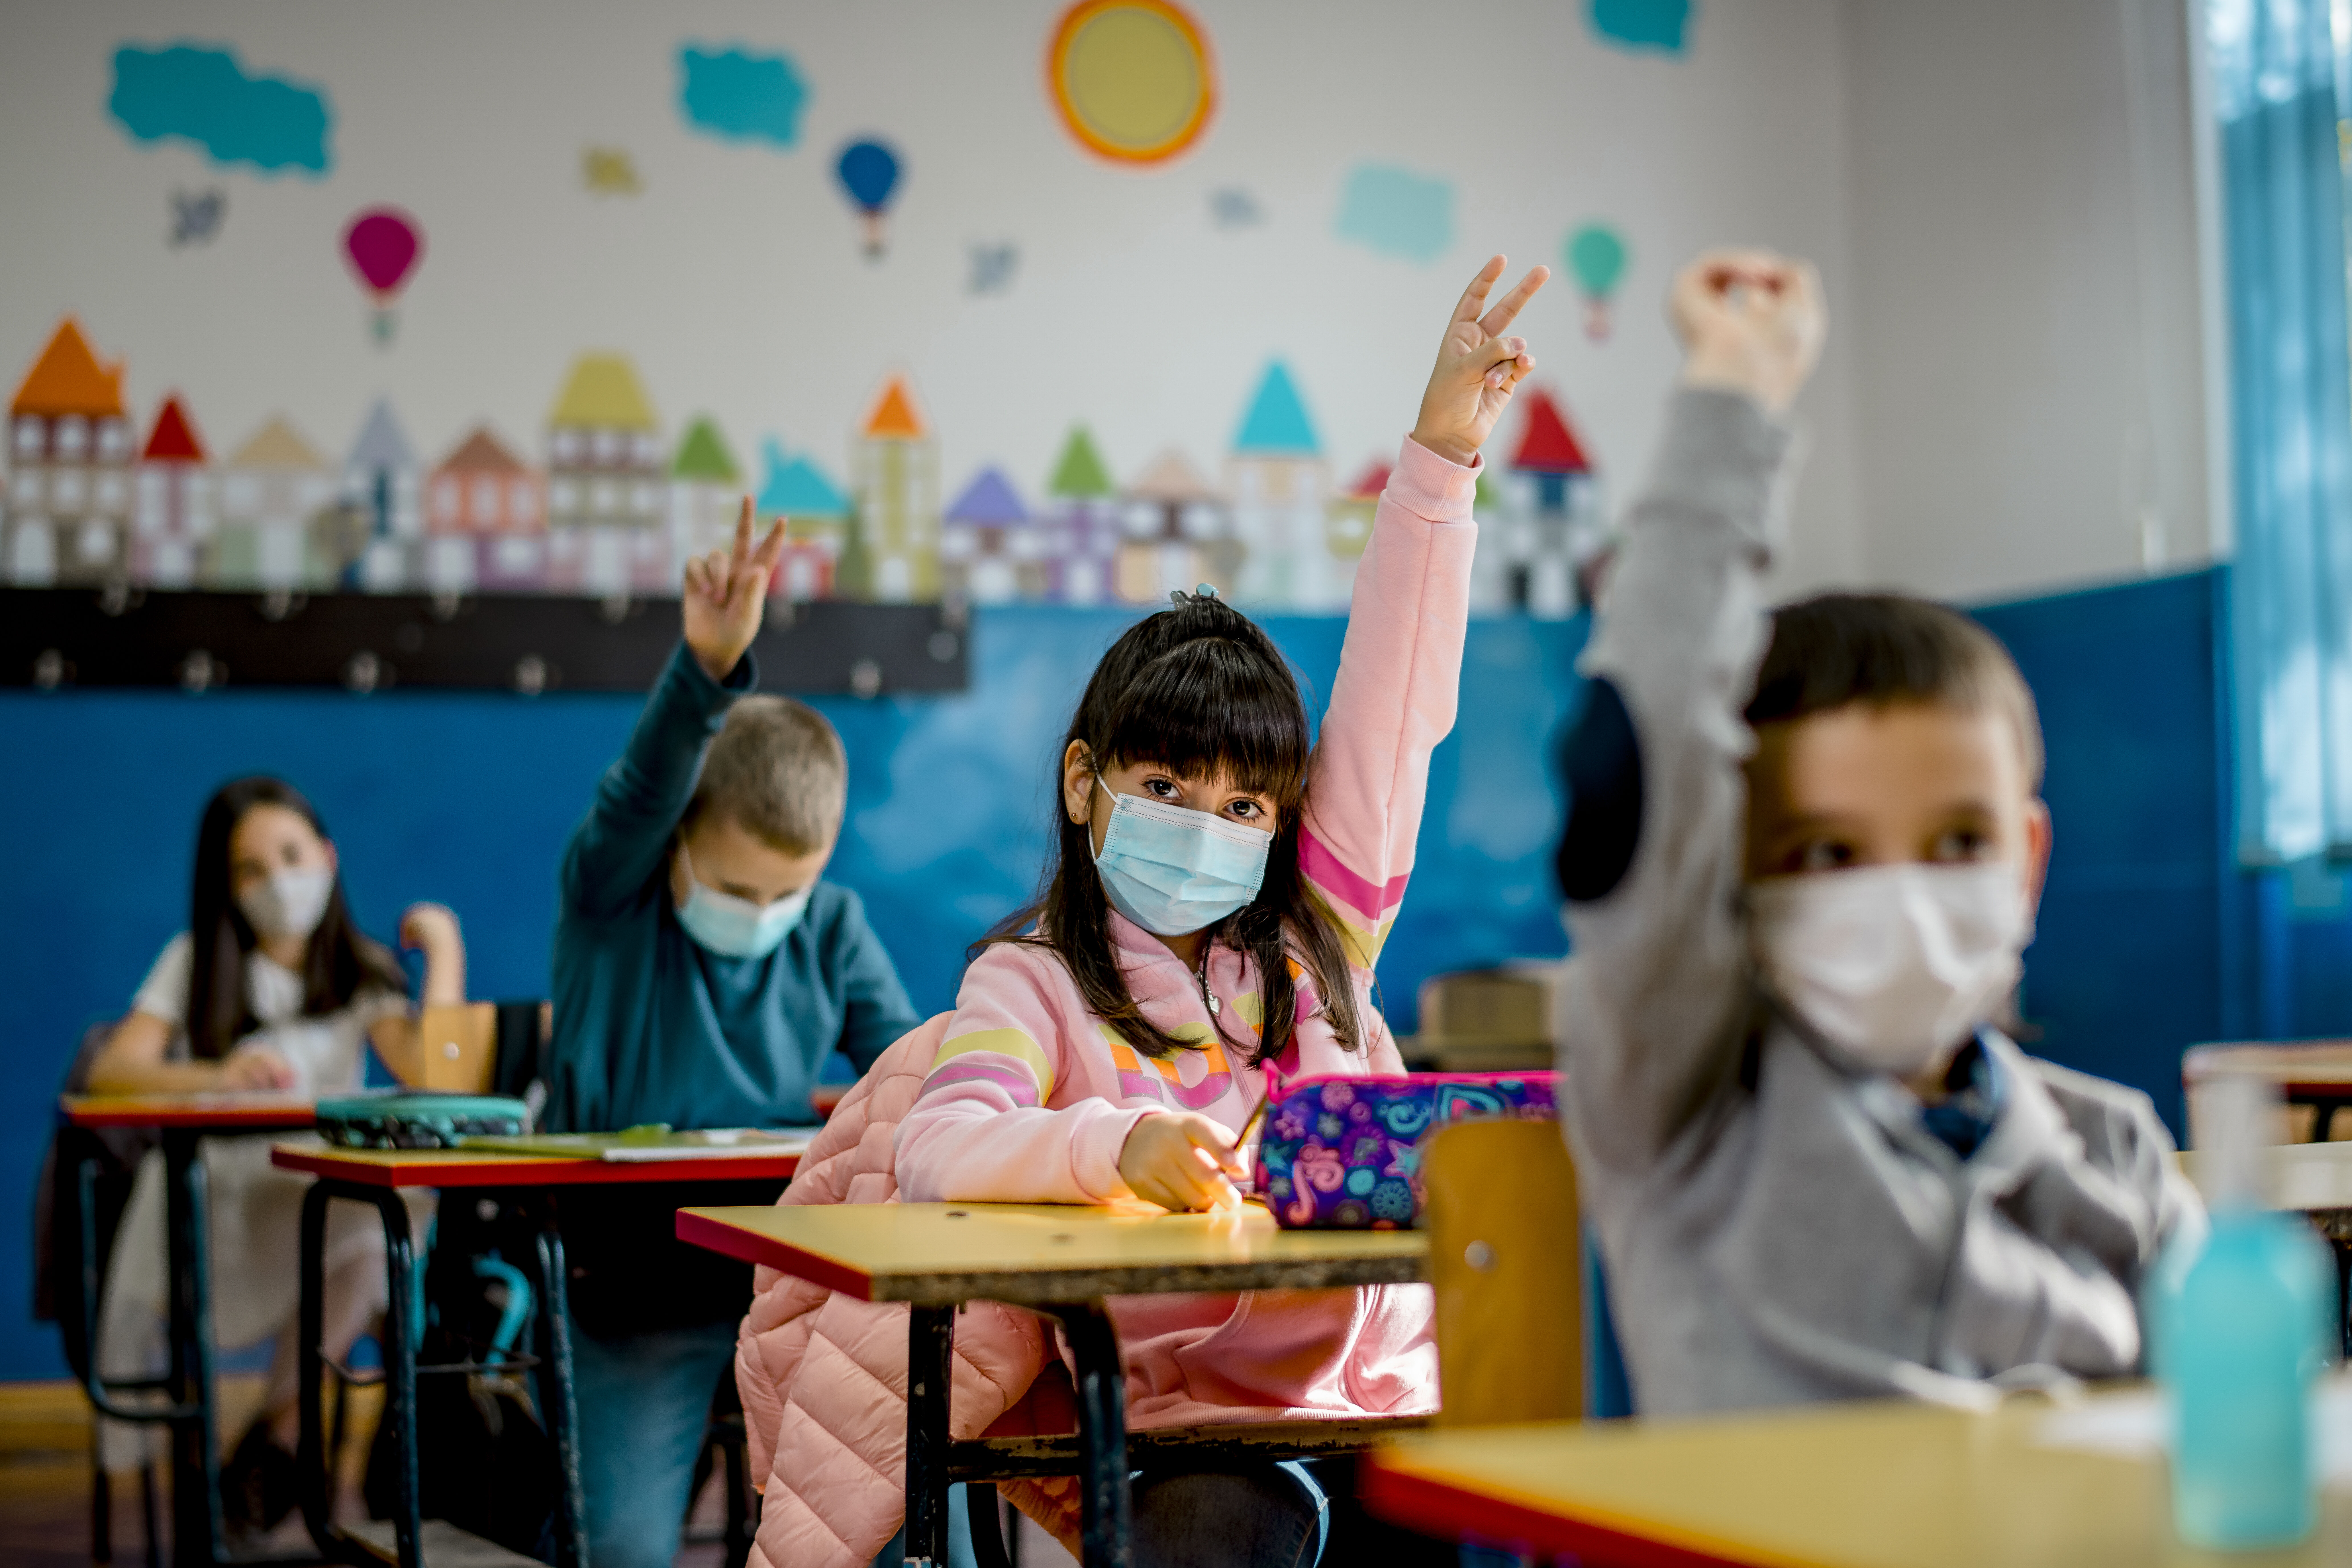 Maryland’s school board to watch COVID-19 data ‘with optimism’ before removing mask policy